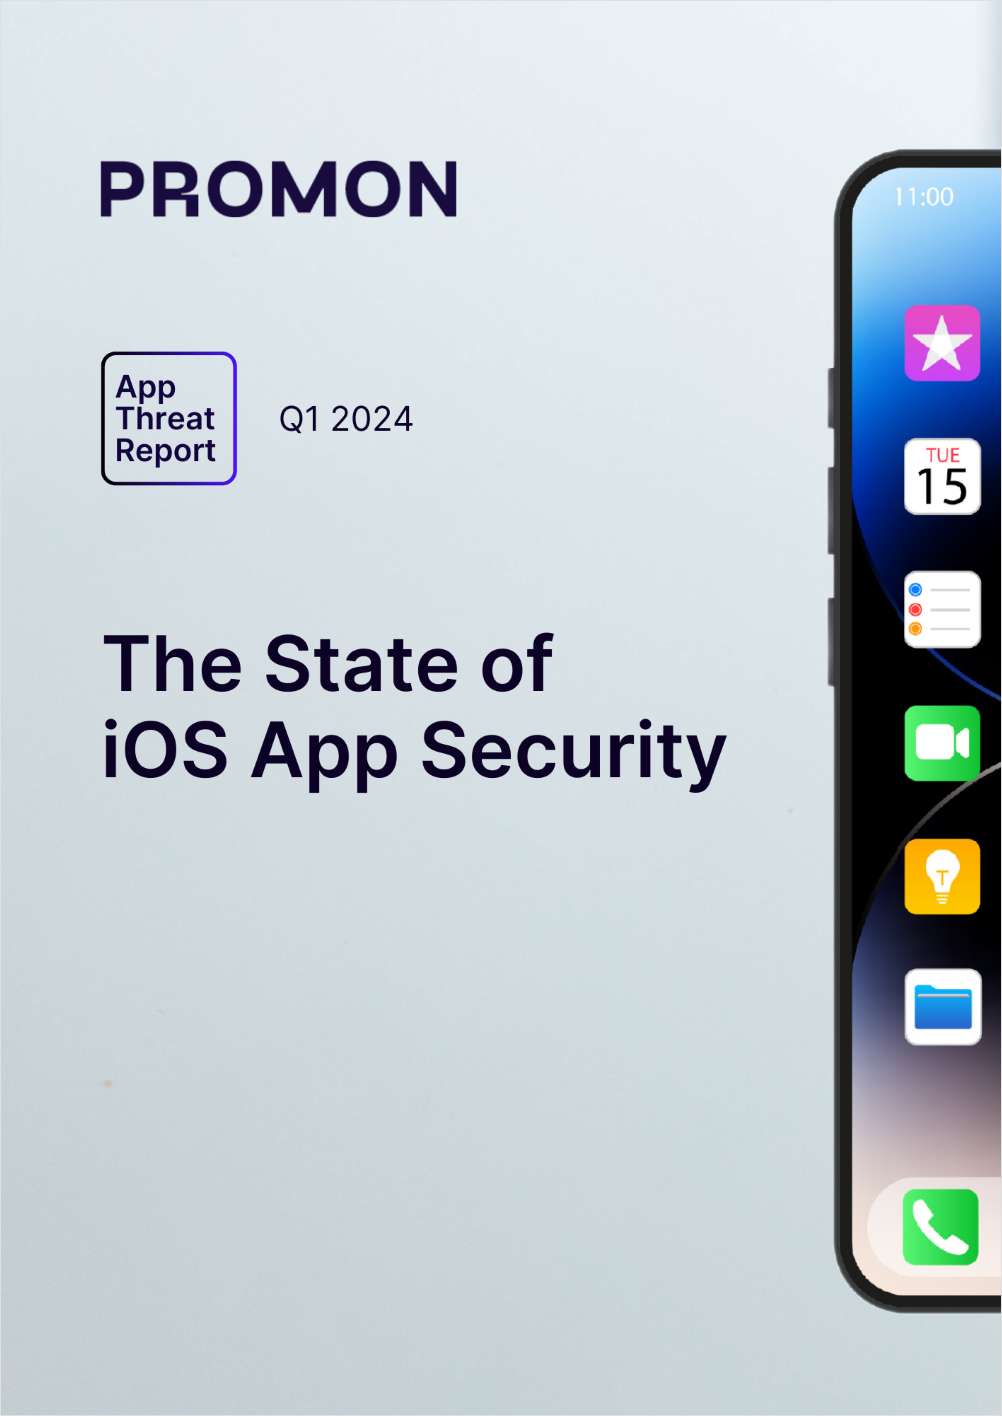 App Threat Report: The State of iOS App Security